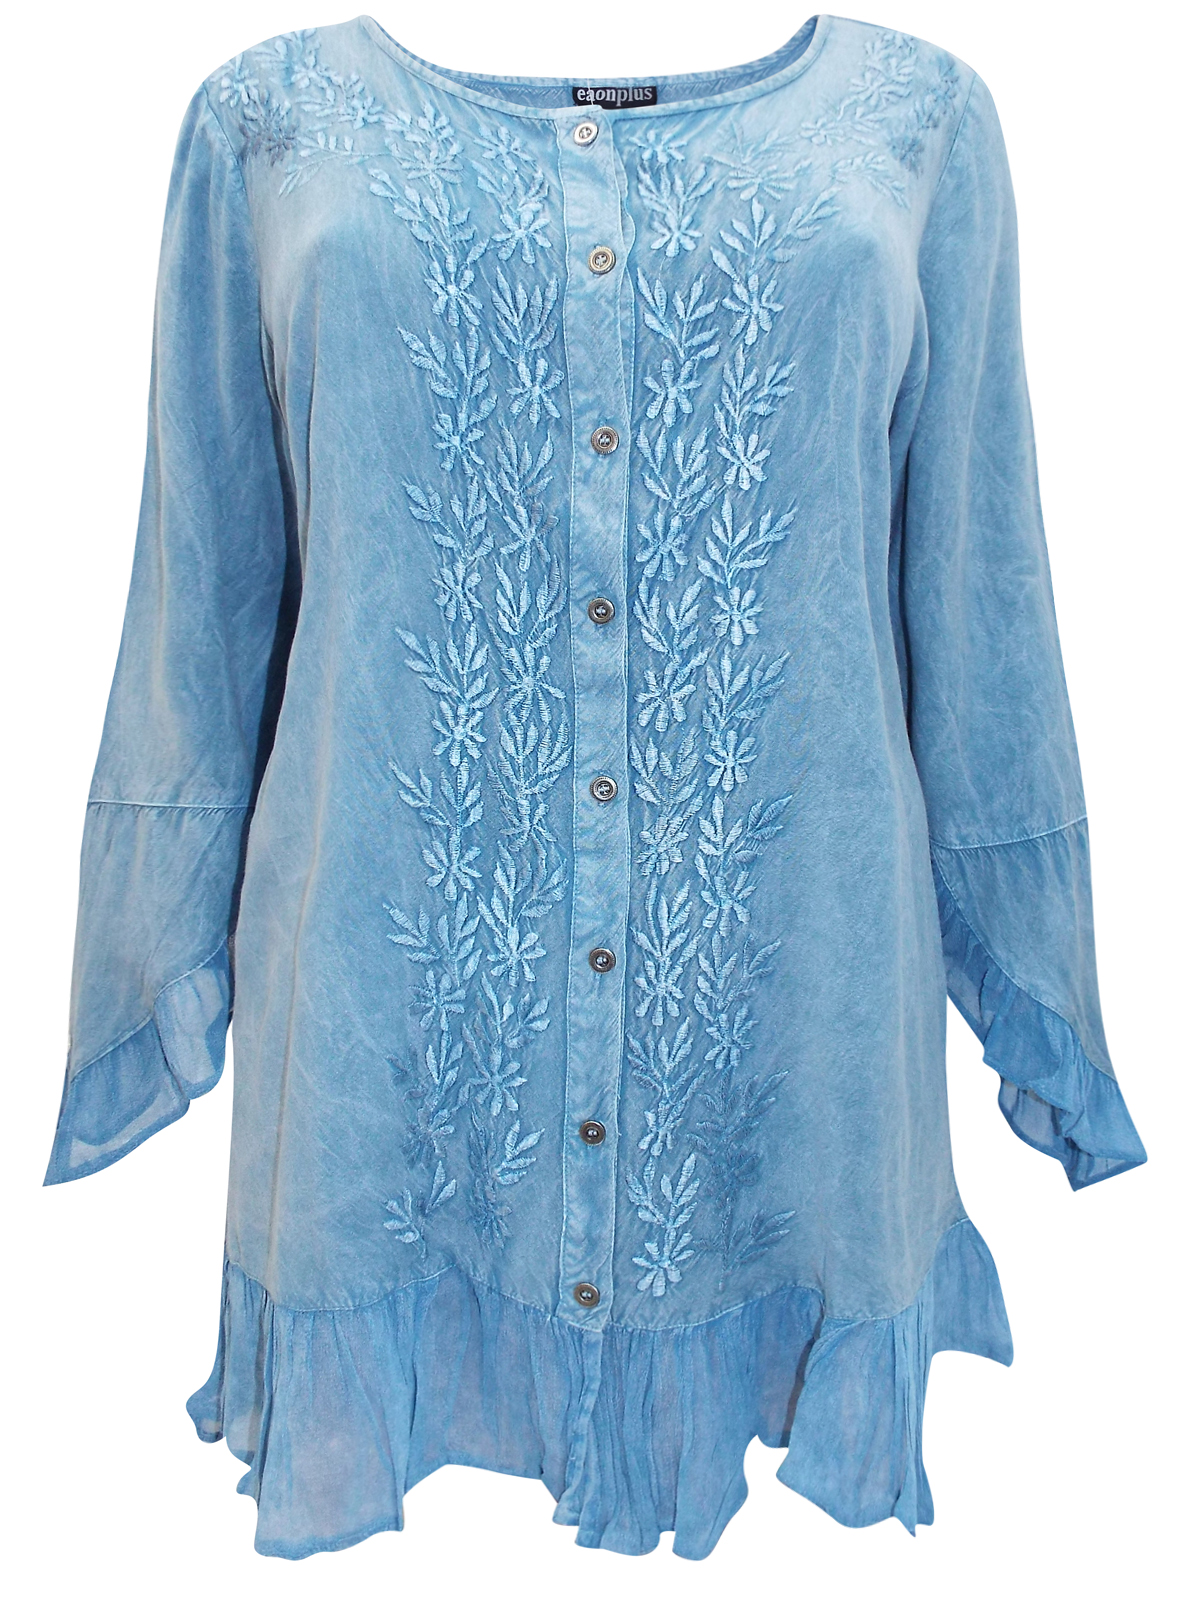 eaonplus DENIM Enchanted Pixie Embroidered Blouse - Plus Size 18/20 to ...